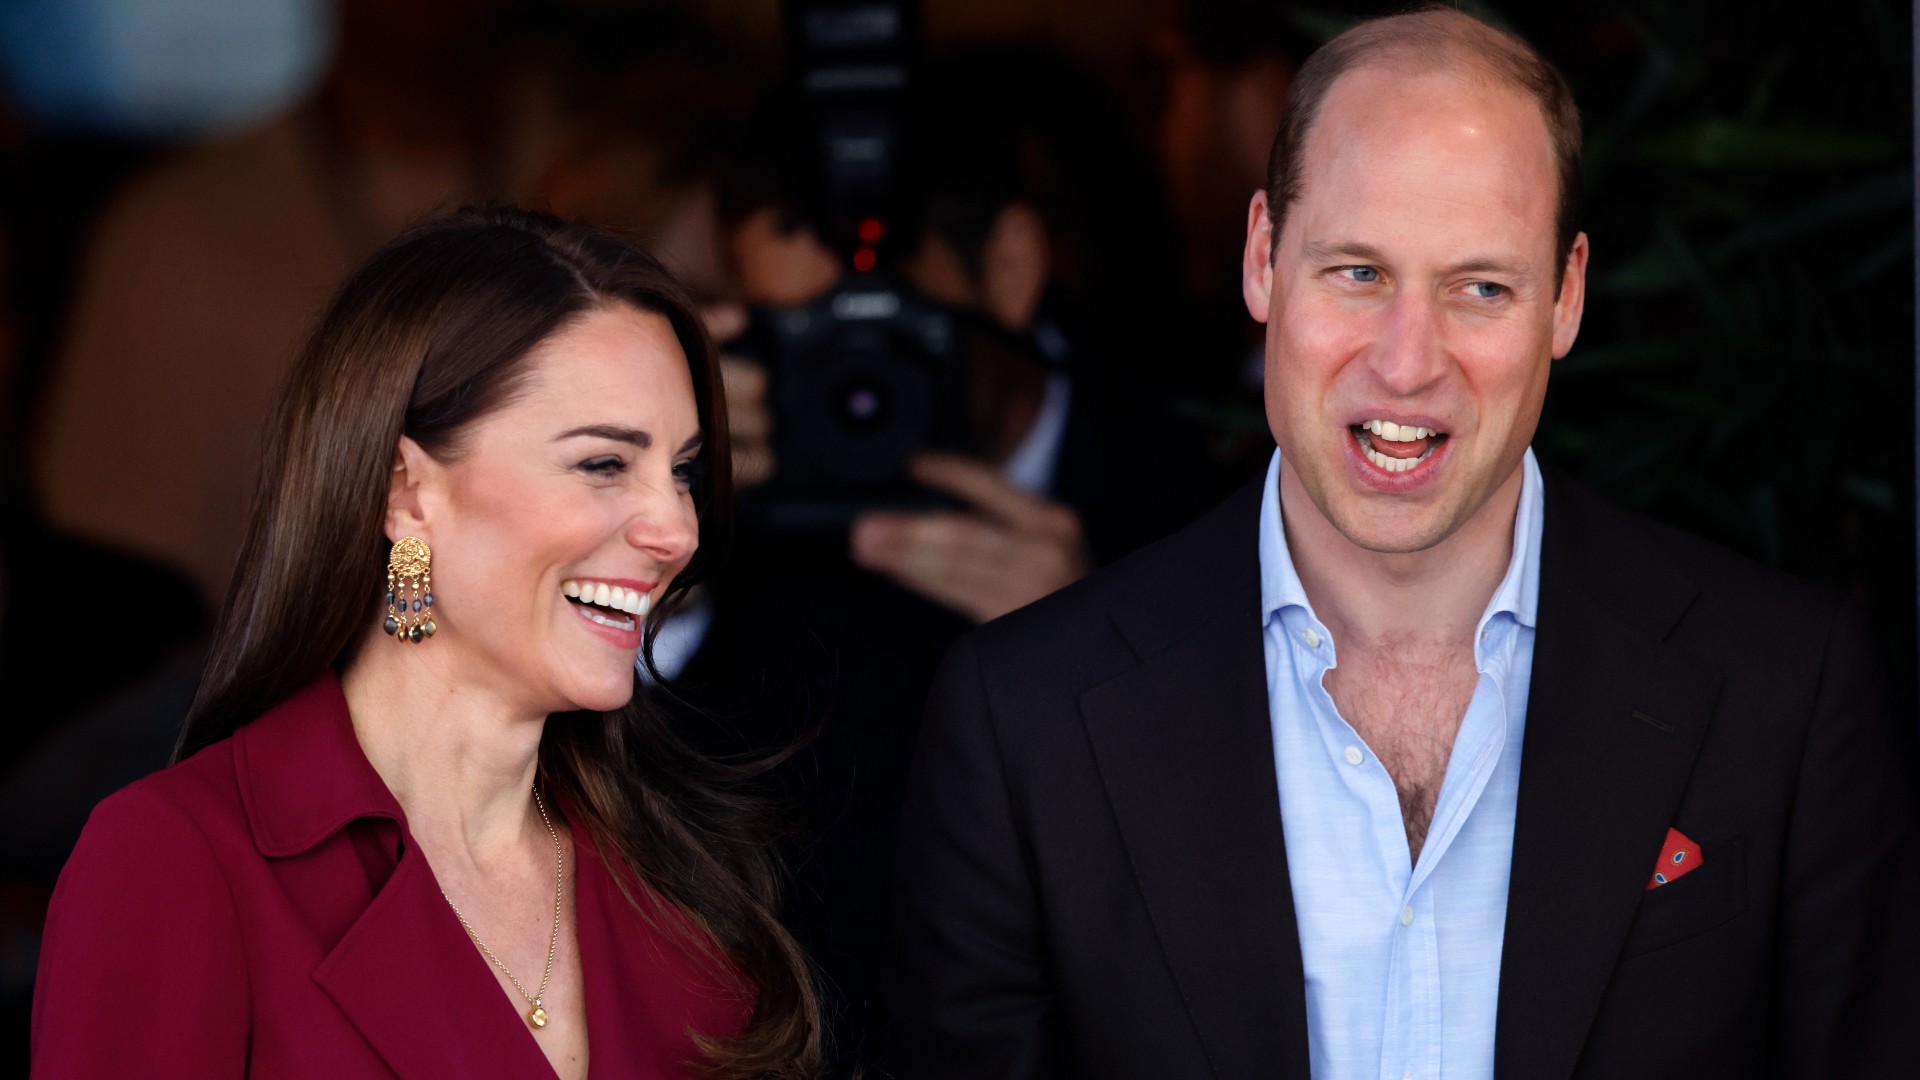 Prince William and Princess Kate Are "Resigned" to Staying in "Too